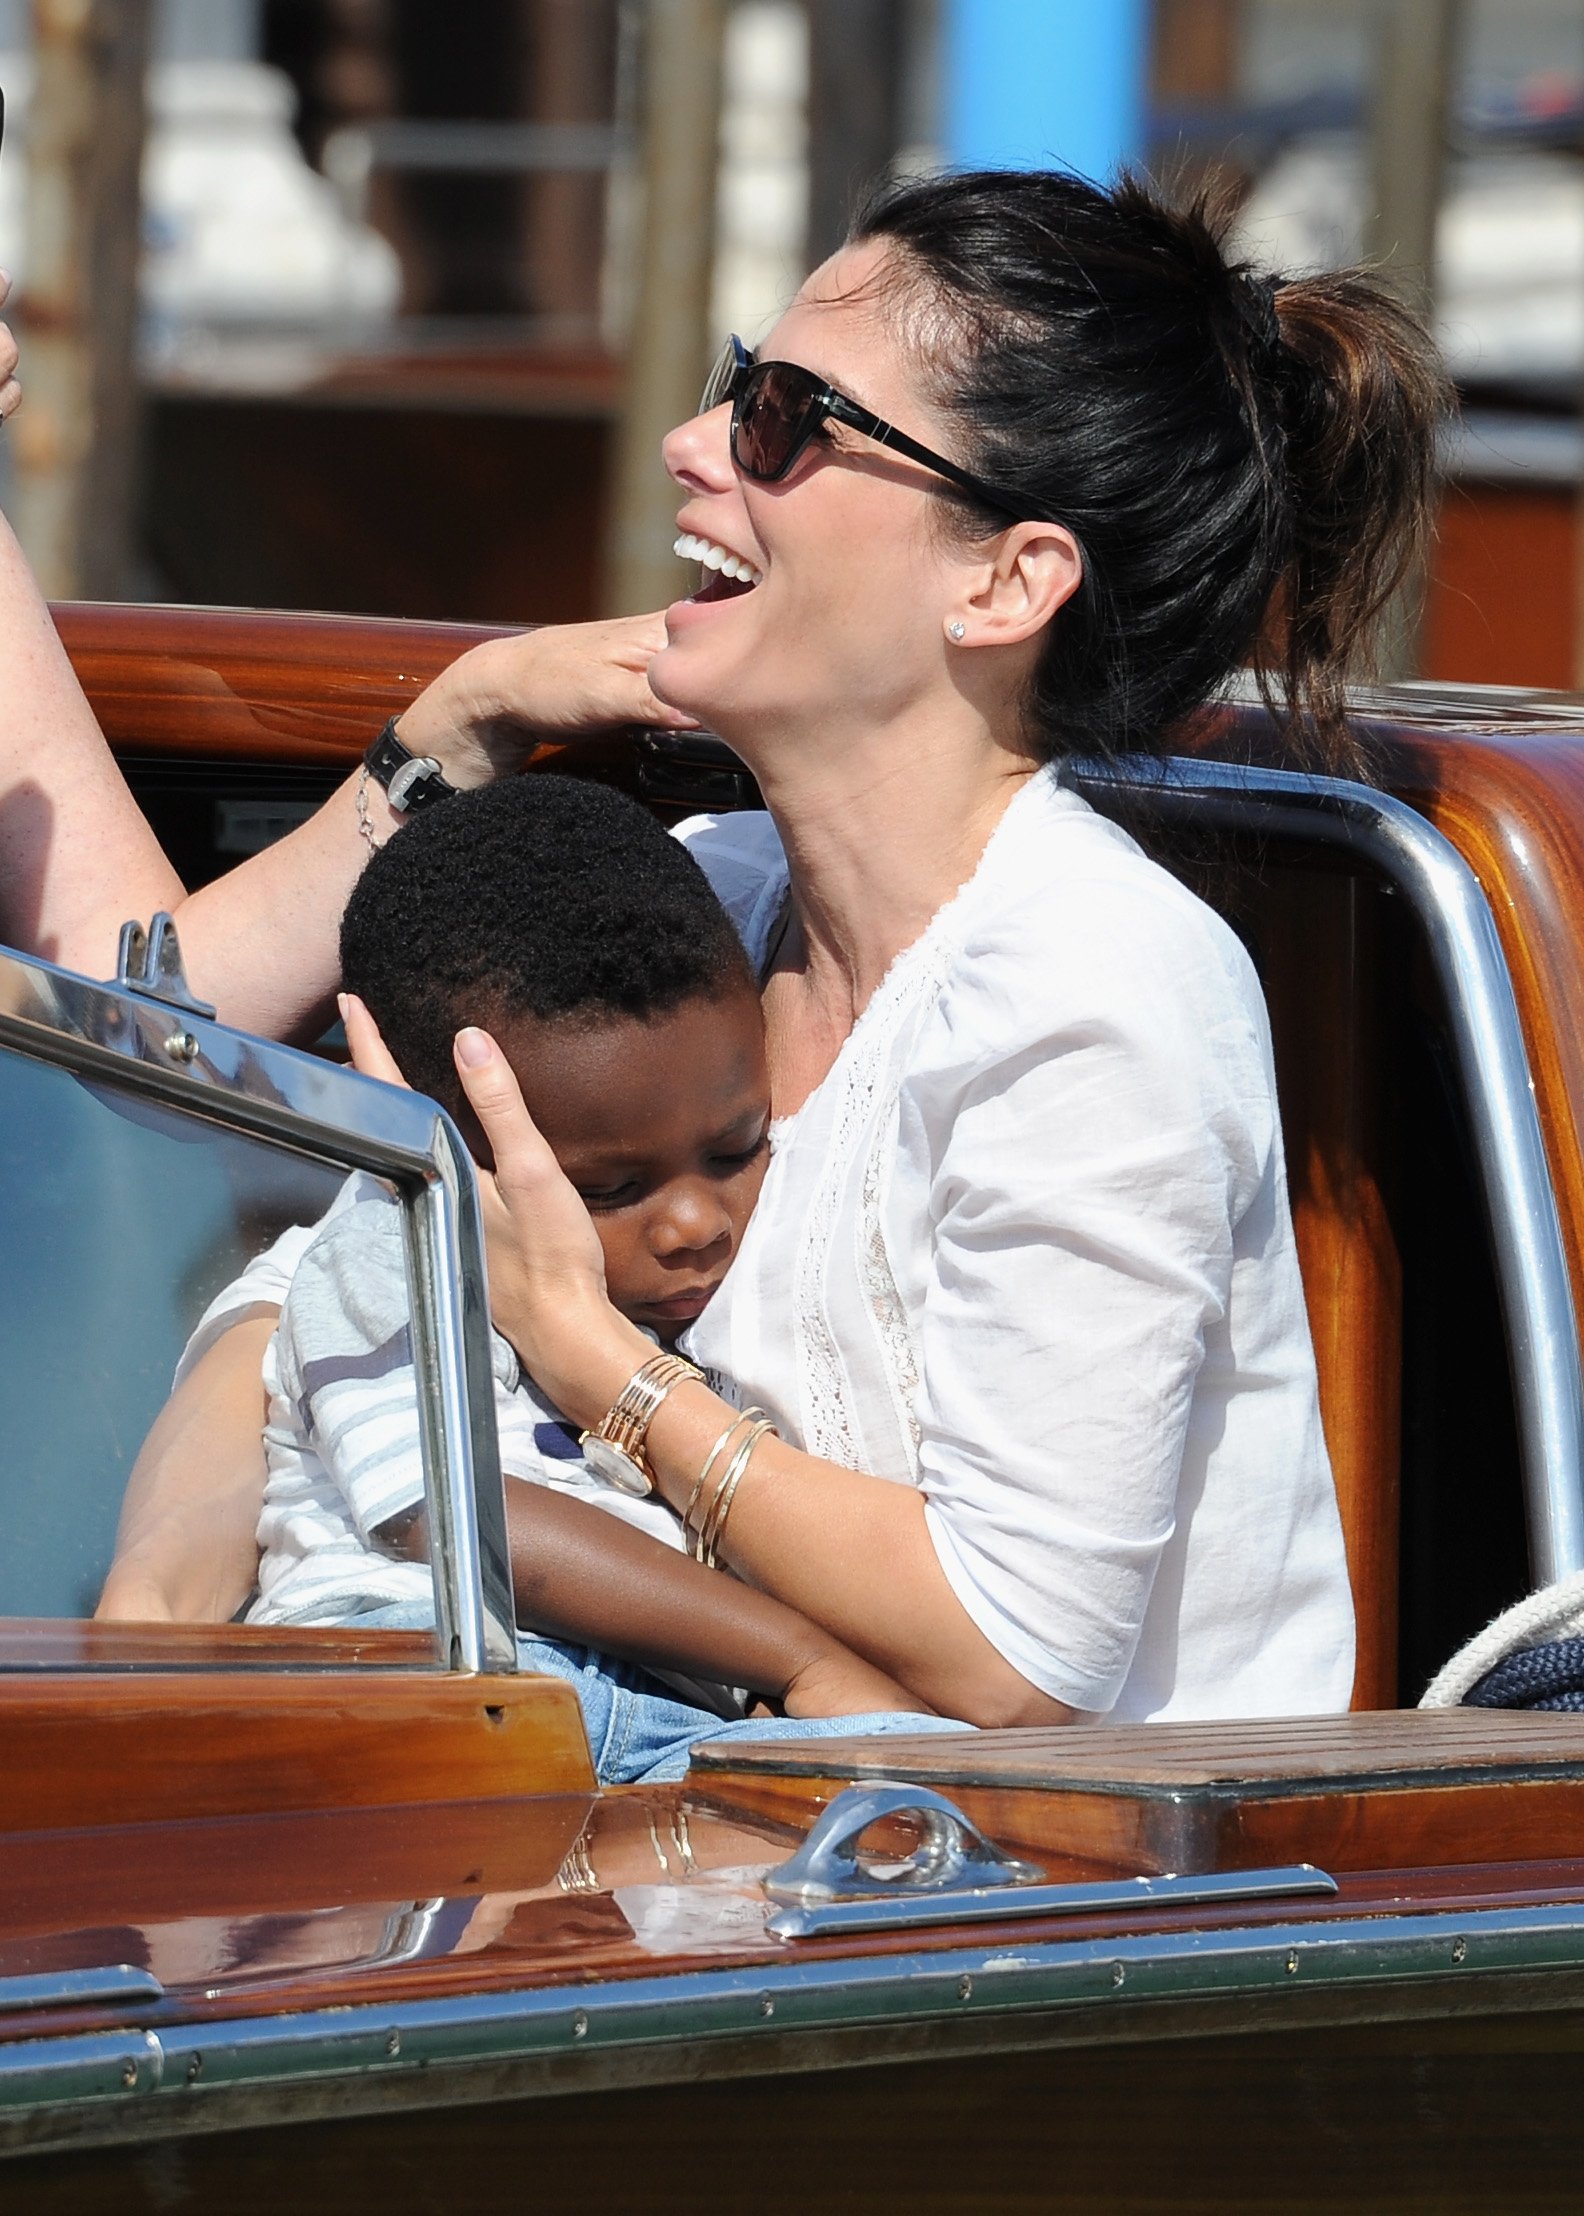 Sandra Bullock with her son in Venice Italy 2013. | Source: Getty Images